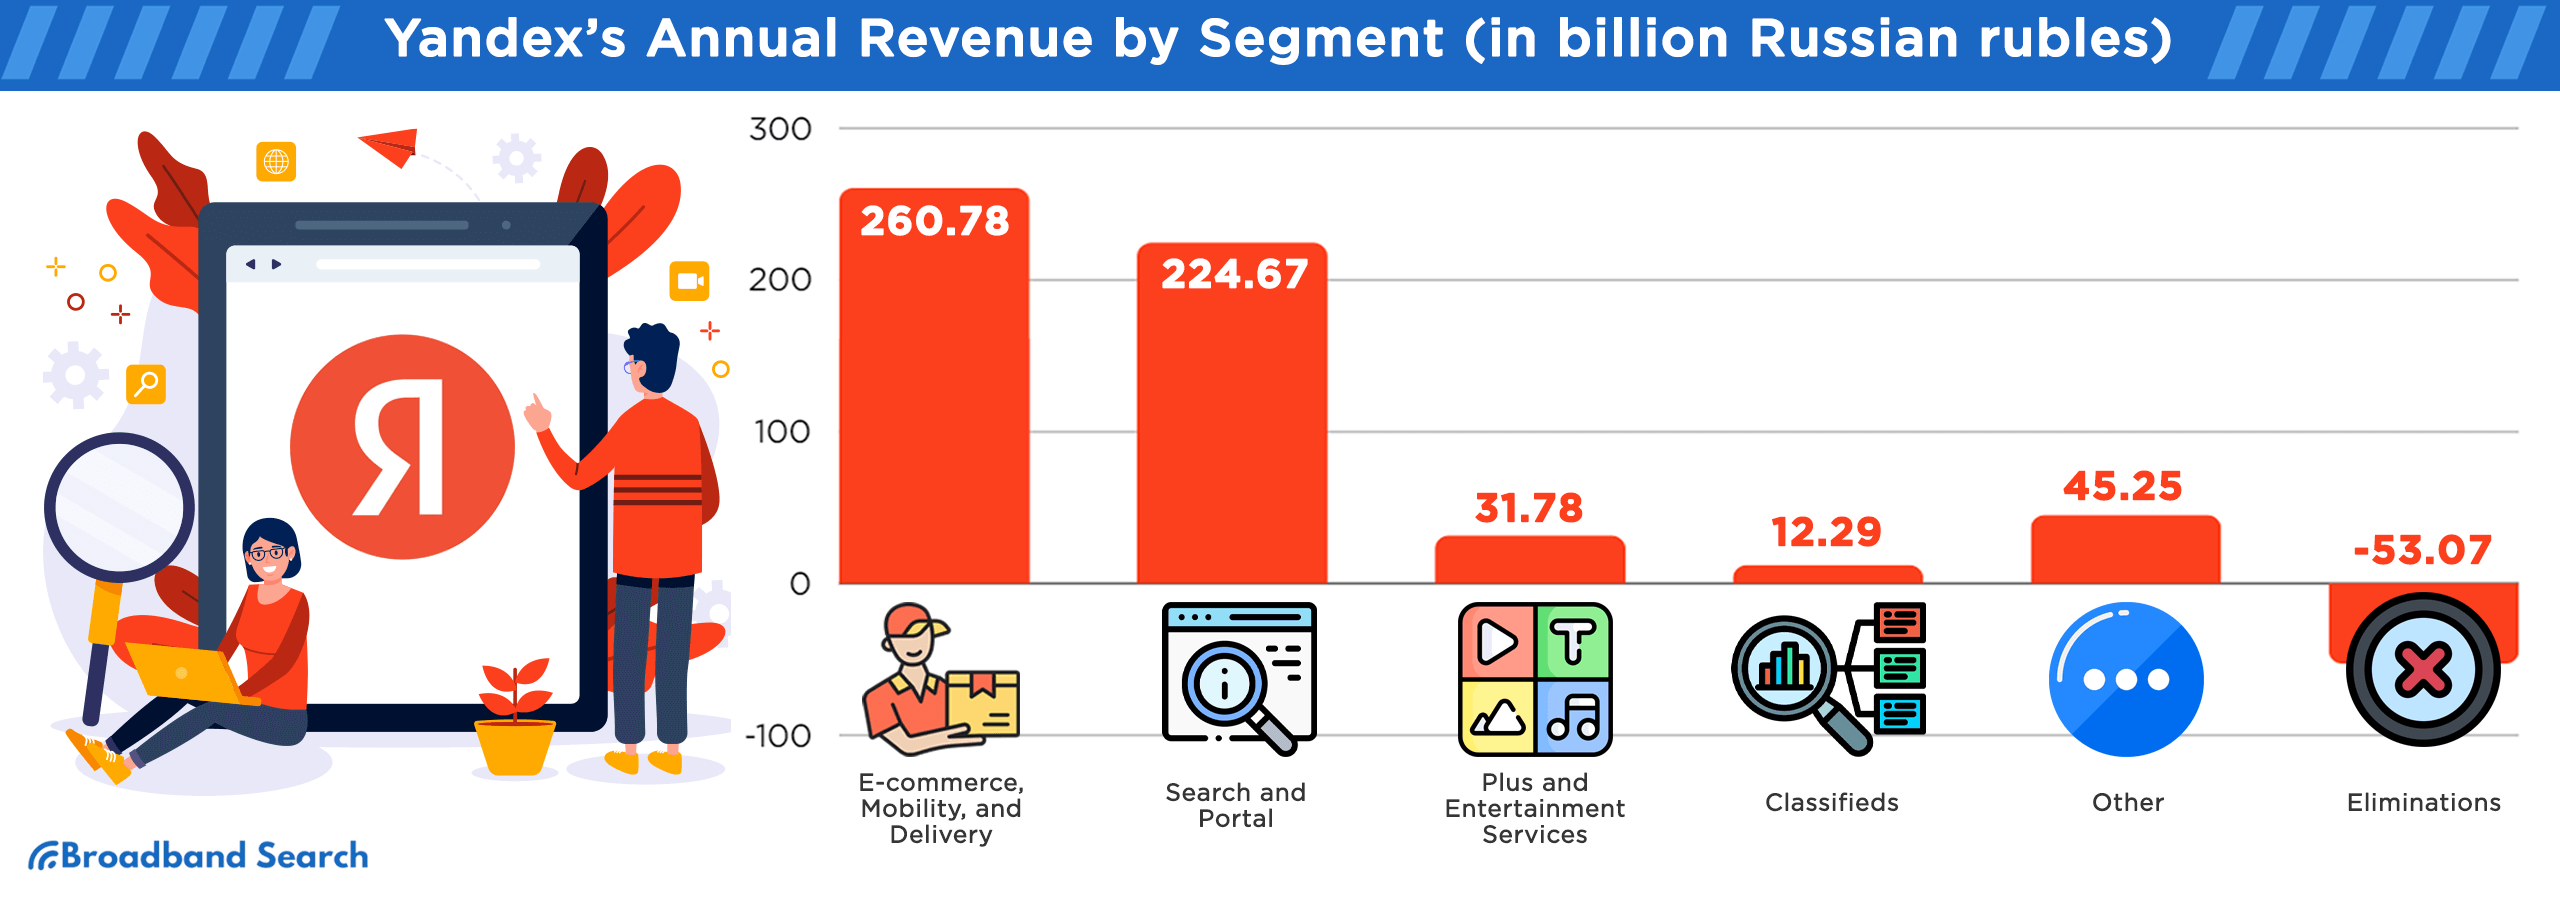 Yandex's annual revenue by segment which is represented in billions under the russian rubles currency